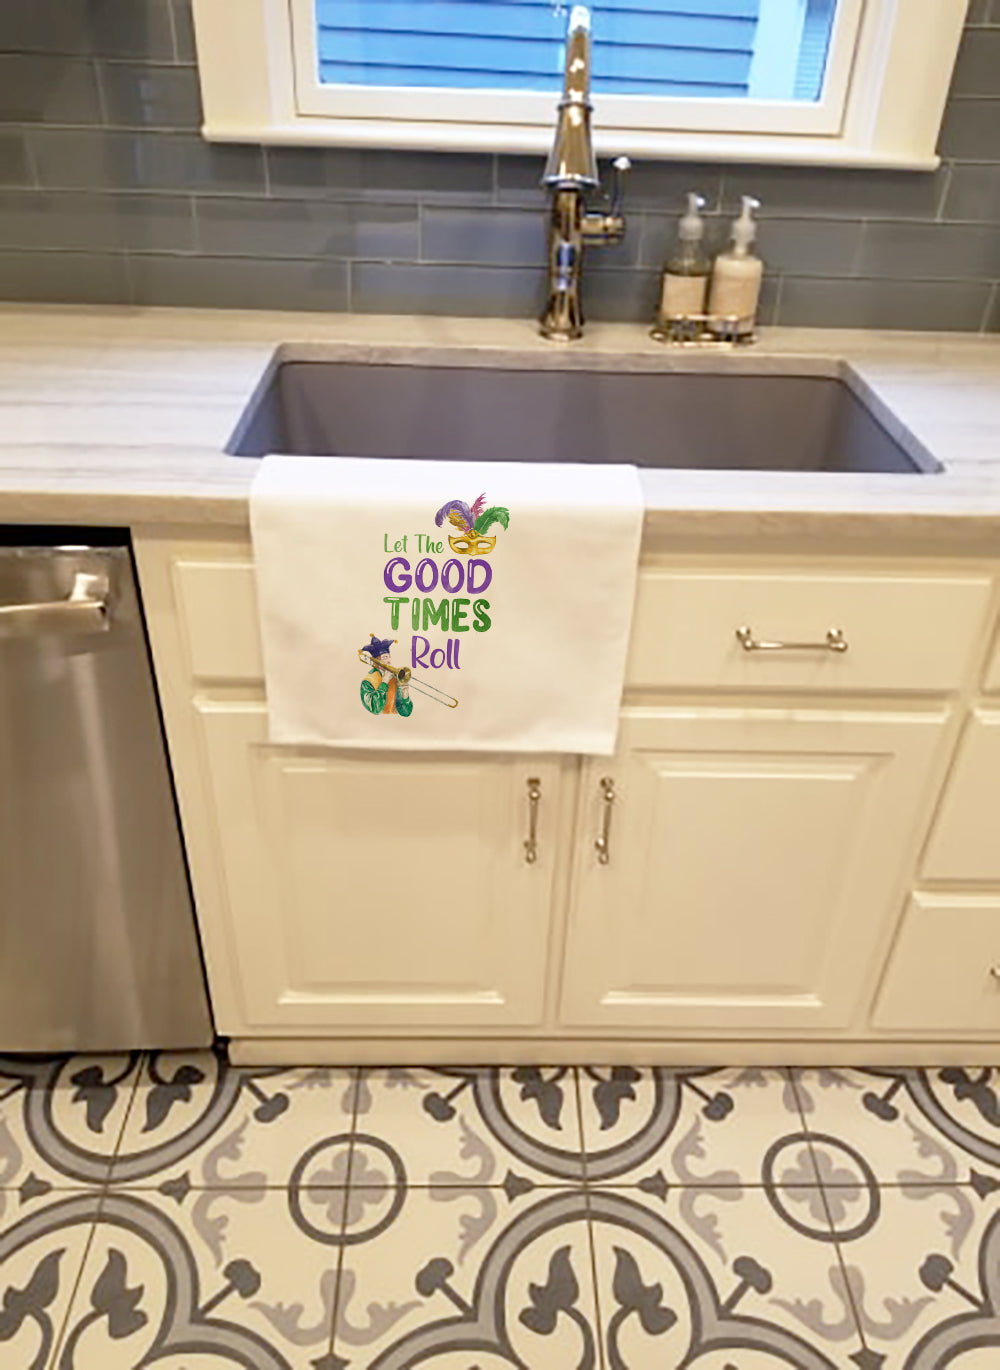 Let the Good Times Roll Mardi Gras White Kitchen Towel Set of 2 Dish Towels - the-store.com